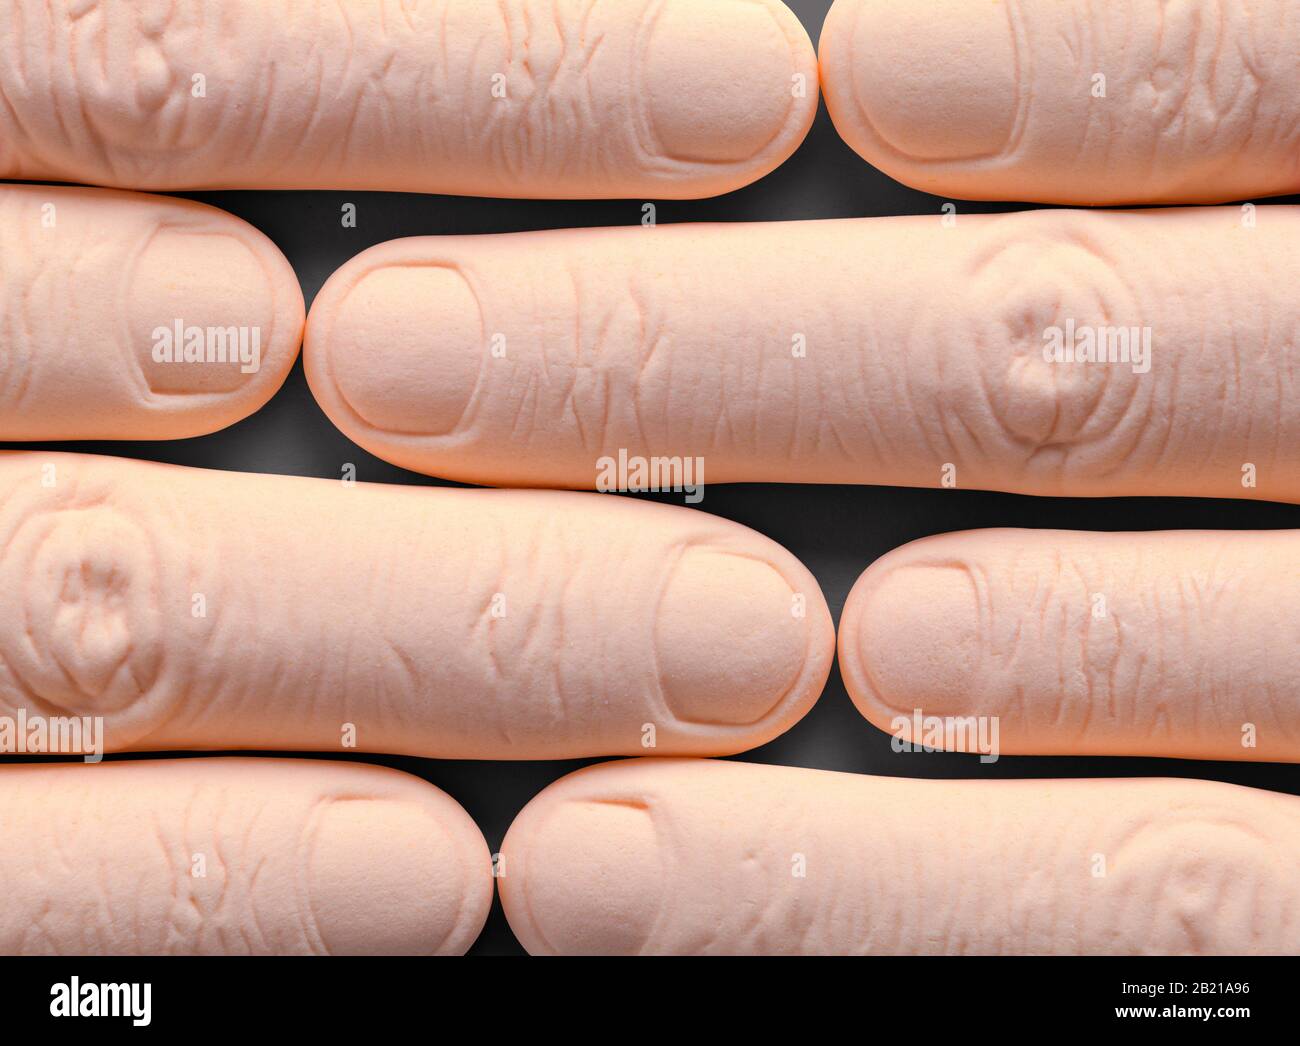 Several Index Fingers Close Up on Black Background. Stock Photo